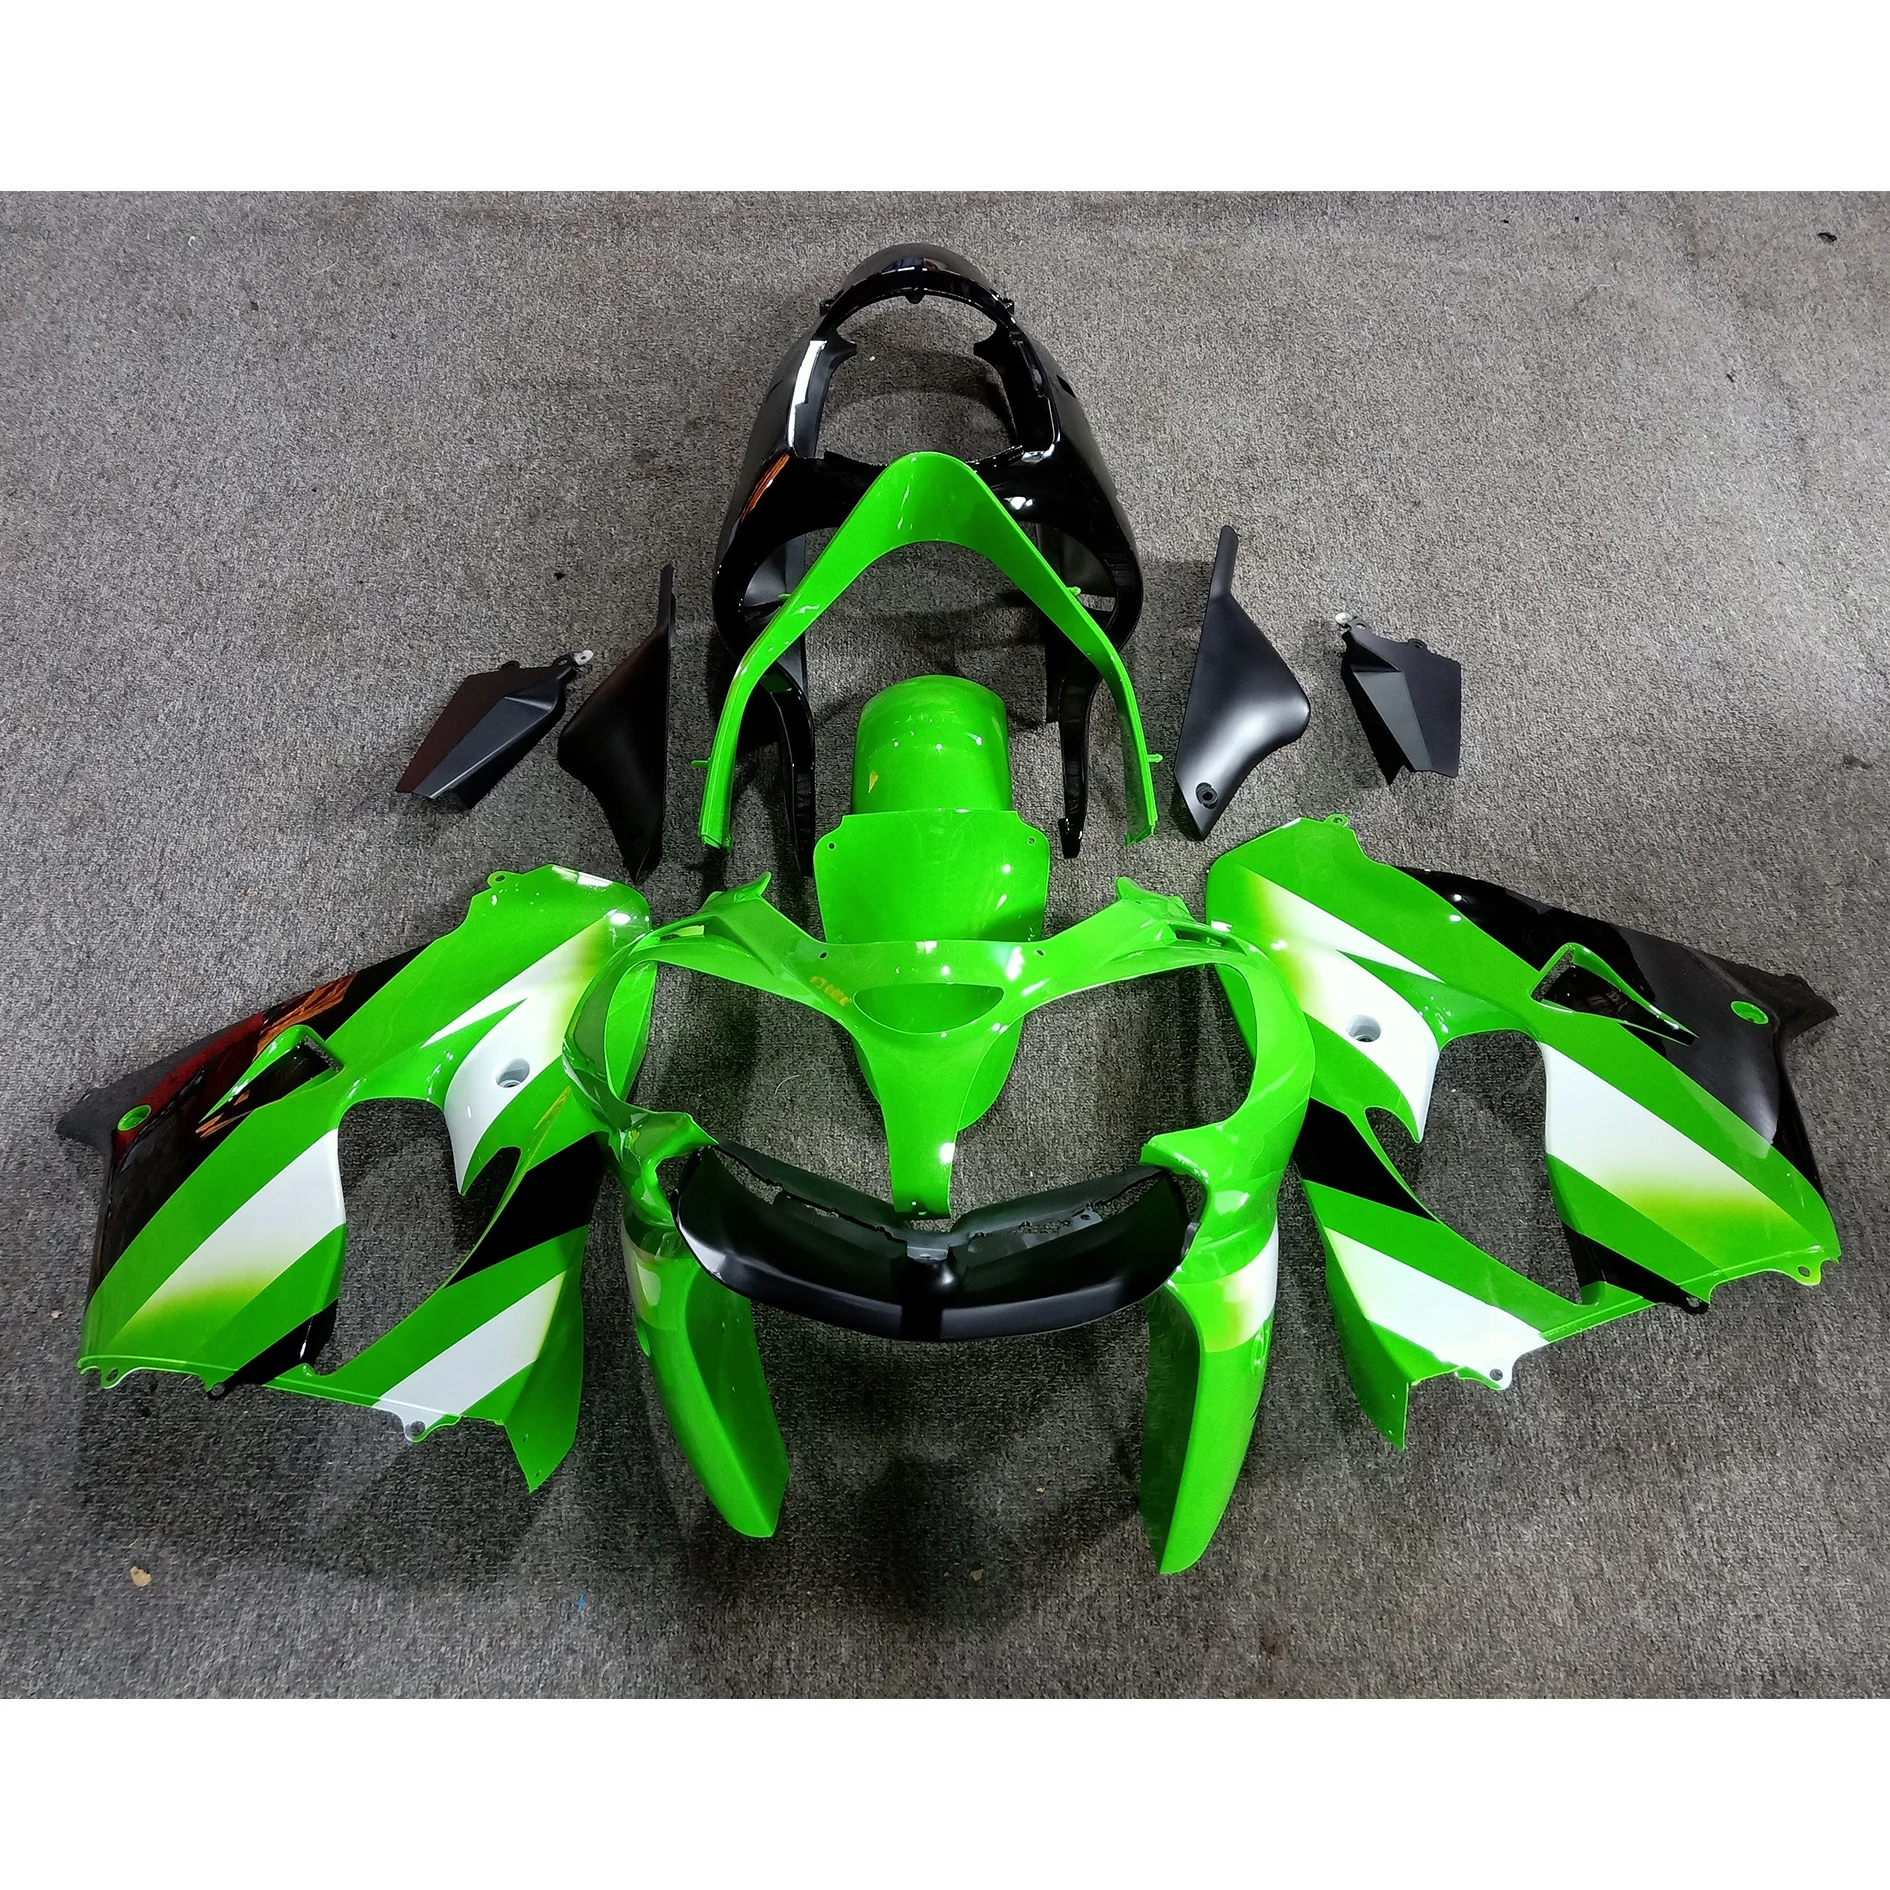 

2022 WHSC Gloss Green Motorcycle Accessories For KAWASAKI ZX-9R 2000-2001 Motorcycle Body Systems Fairing Kits, Pictures shown